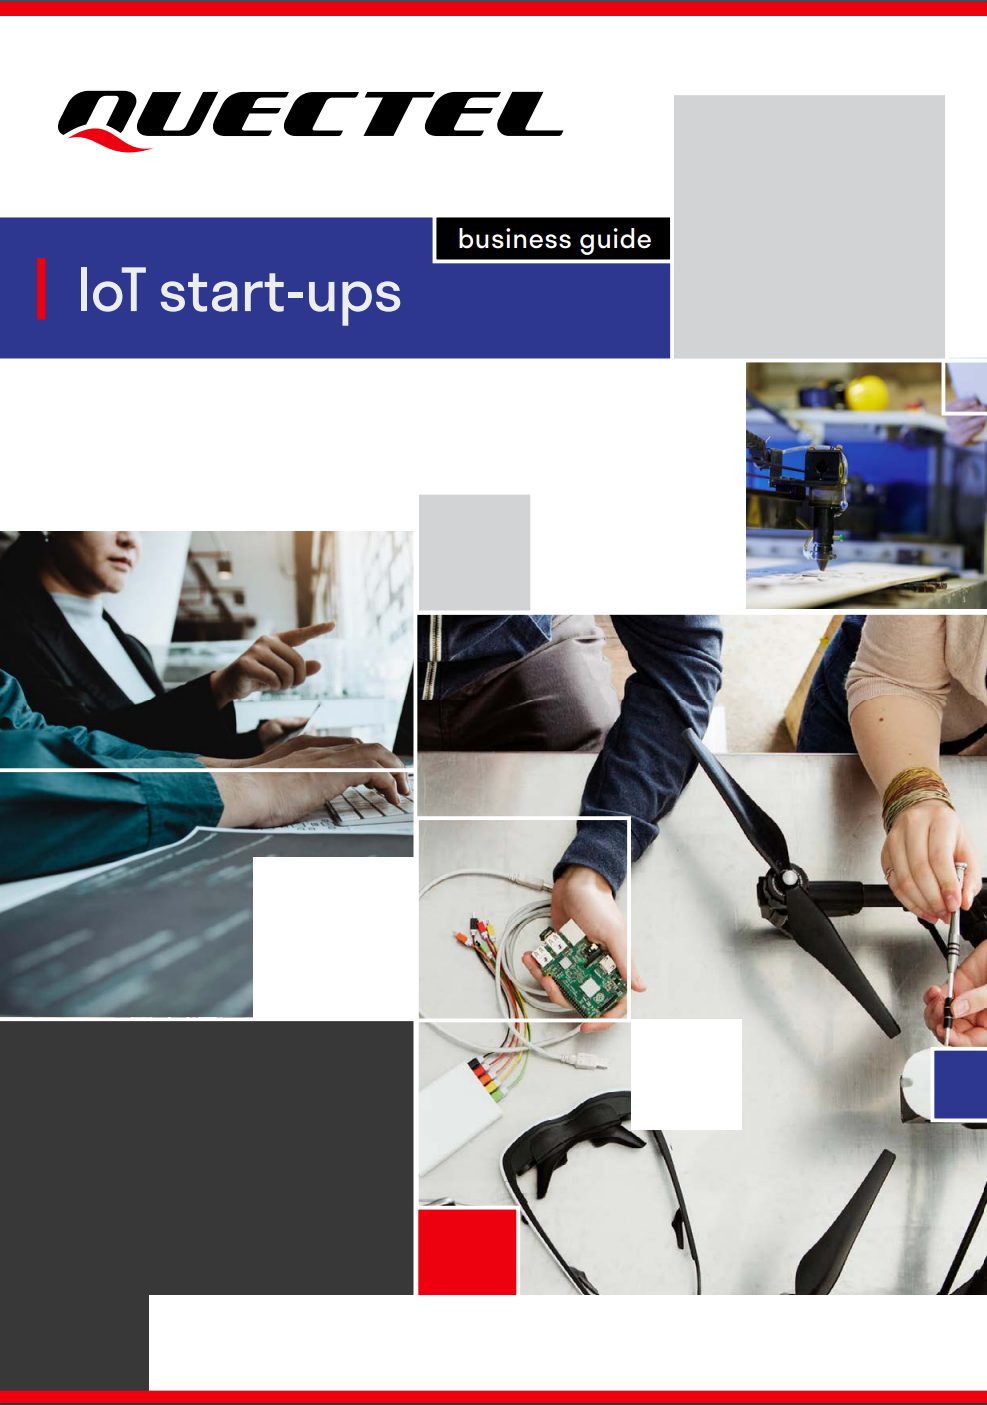 Business guide for IoT start-ups and other new tech companies